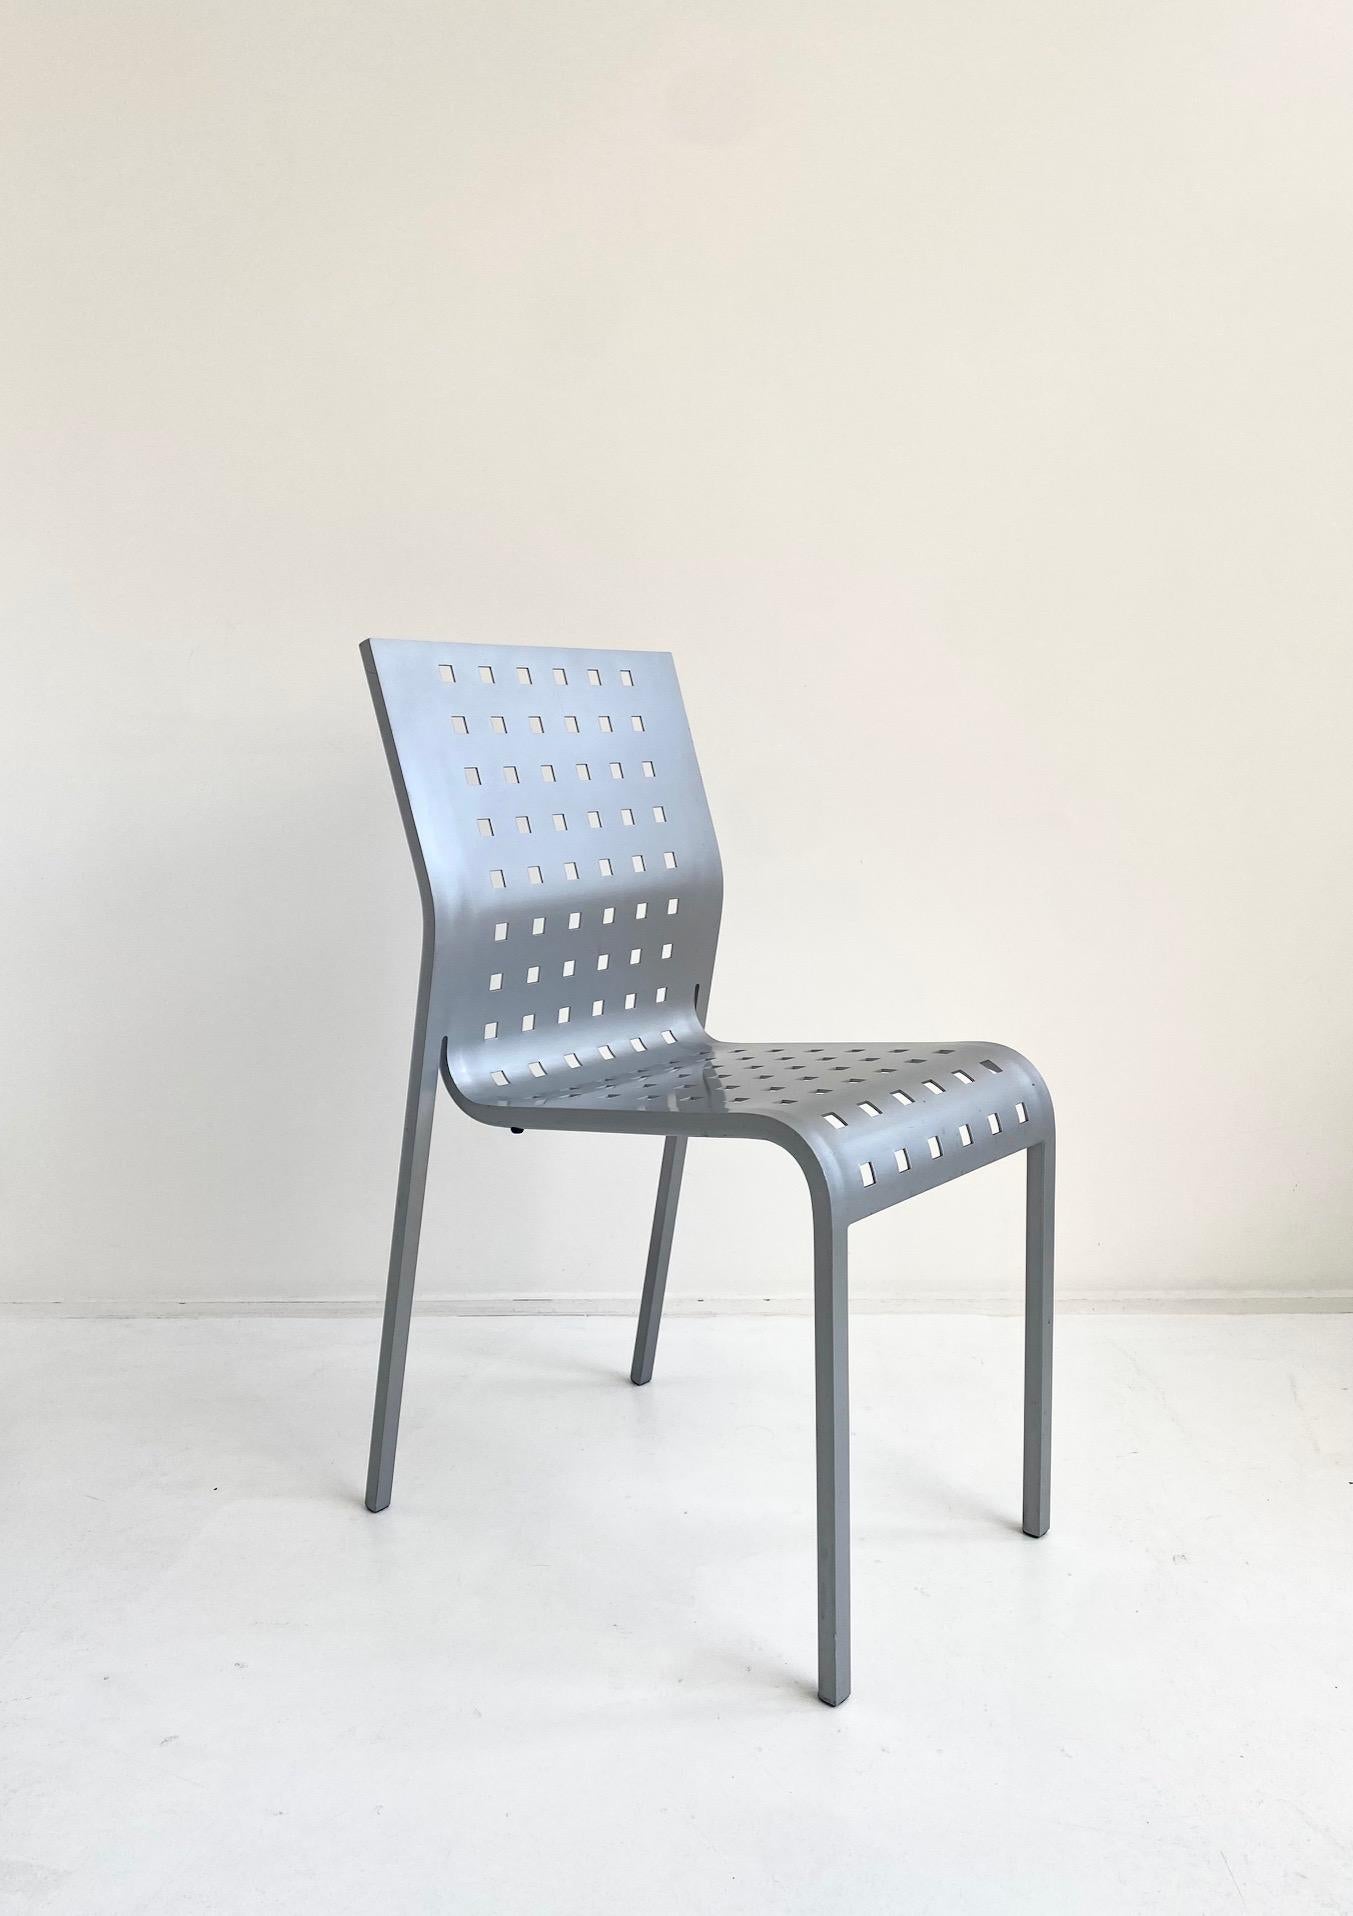 Set of 4 Mirandolina chairs No 2068 by Pietro Arosio, Italy, circa 1993
The seat is formed from one piece of curved aluminium
Very comfortable
Good vintage condition with only minor signs of use.